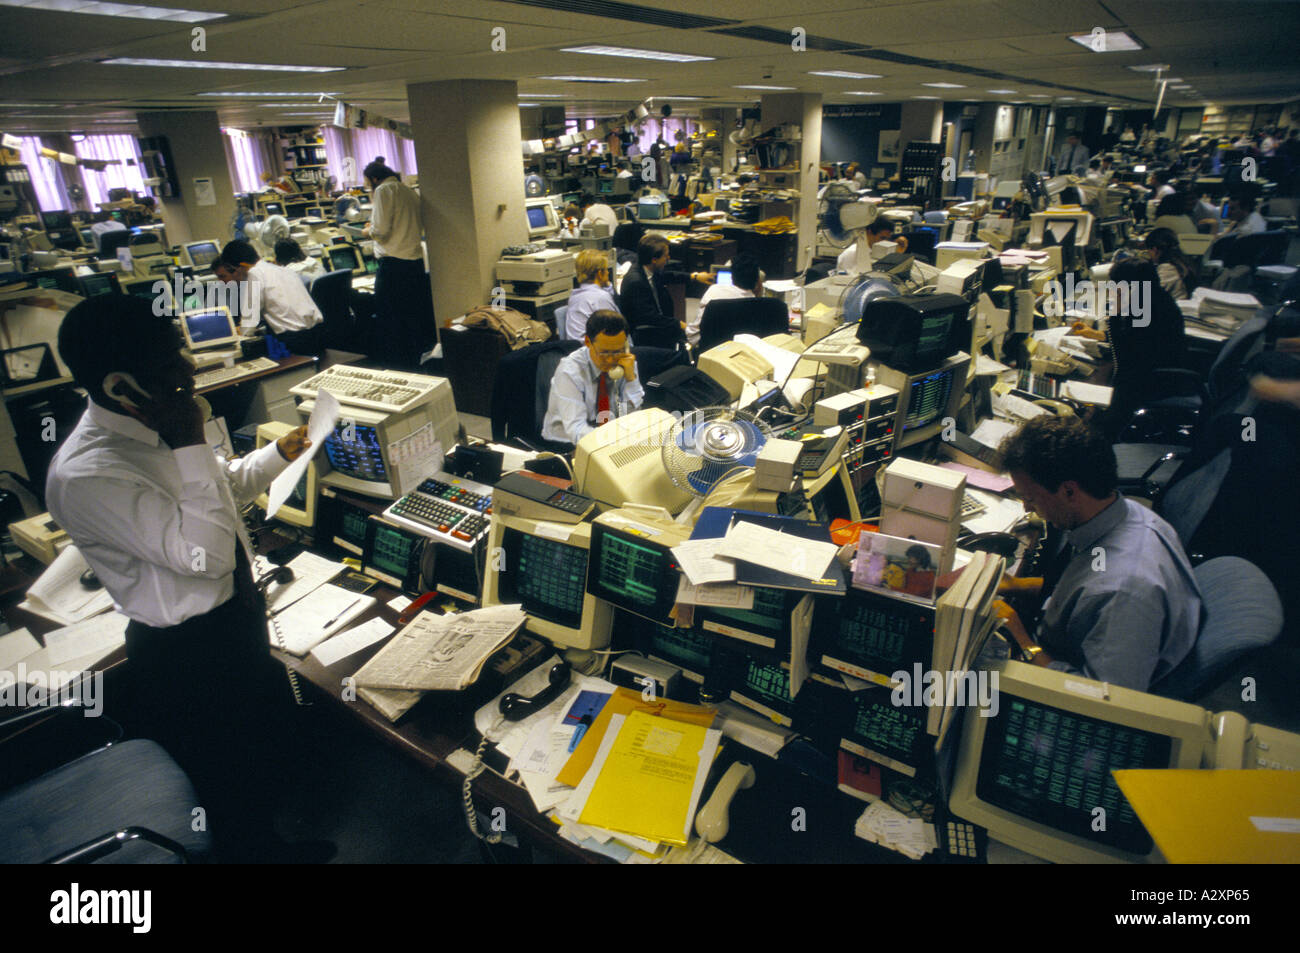 brokers in office dealing with stock currency city of london january Stock Photo, Royalty Free